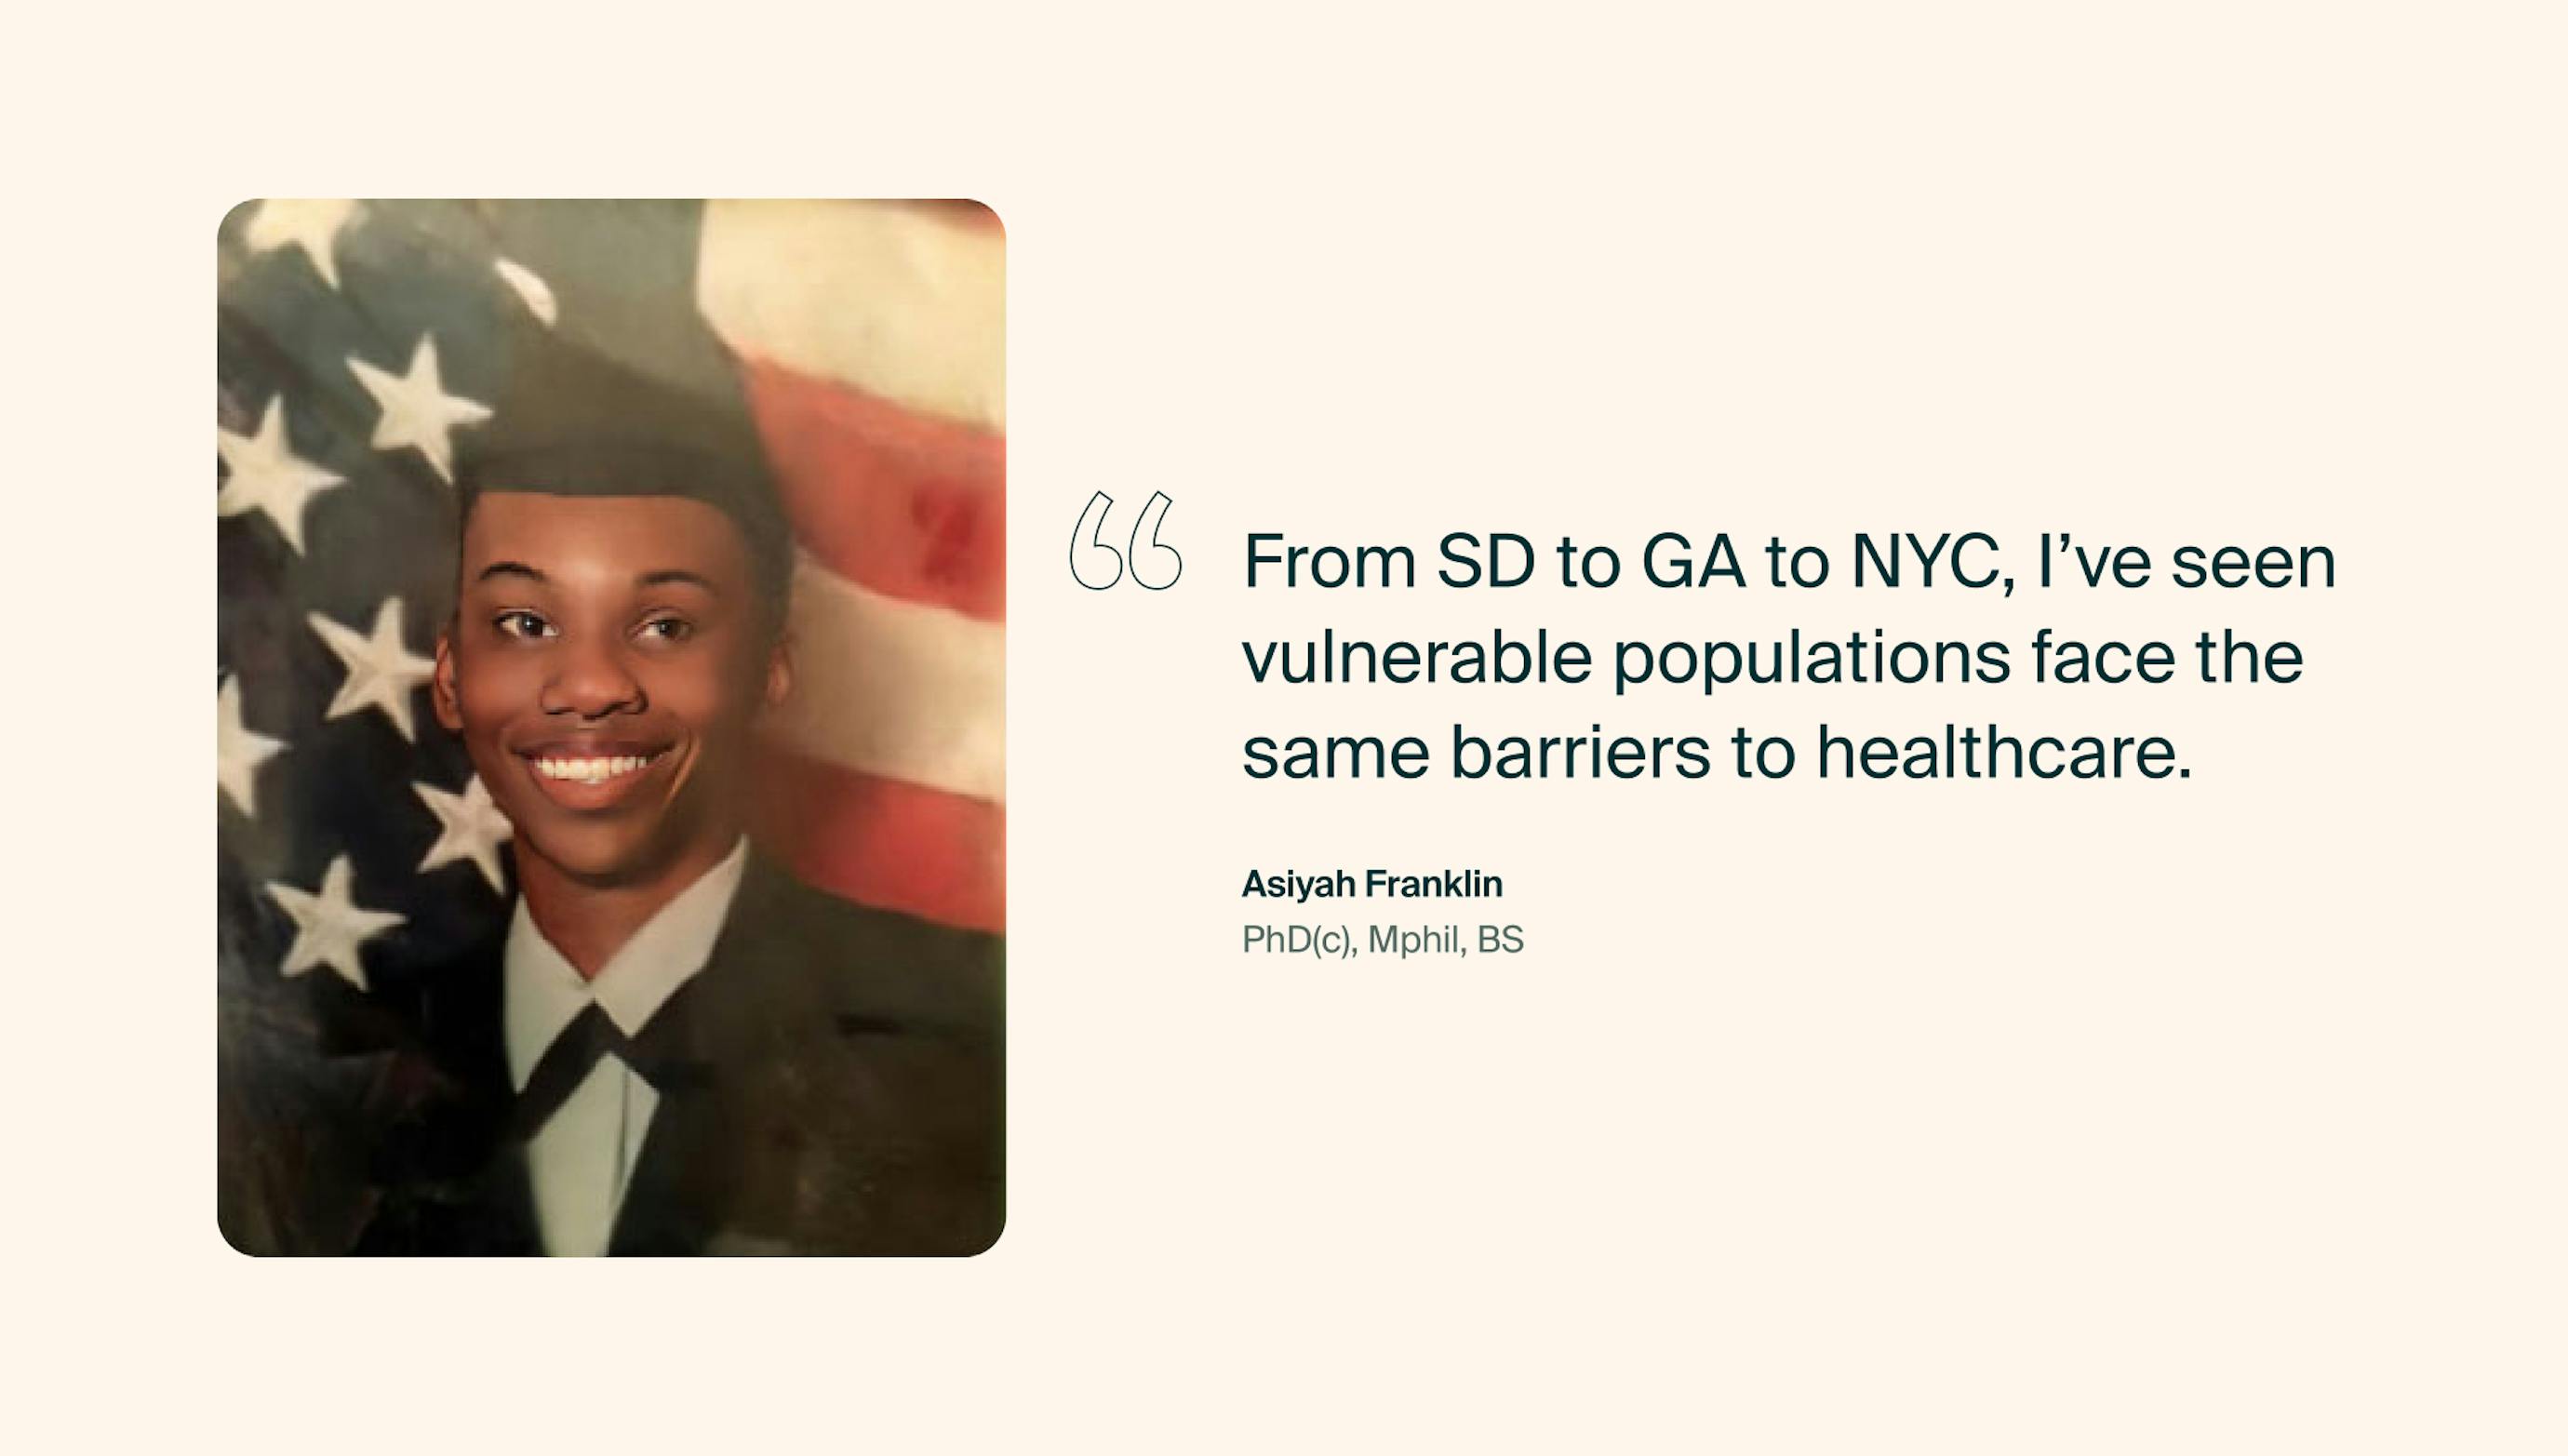 "From SD to GA to NYC, I've seen vulnerable populations face the same barriers to healthcare." –Asiyah Franklin